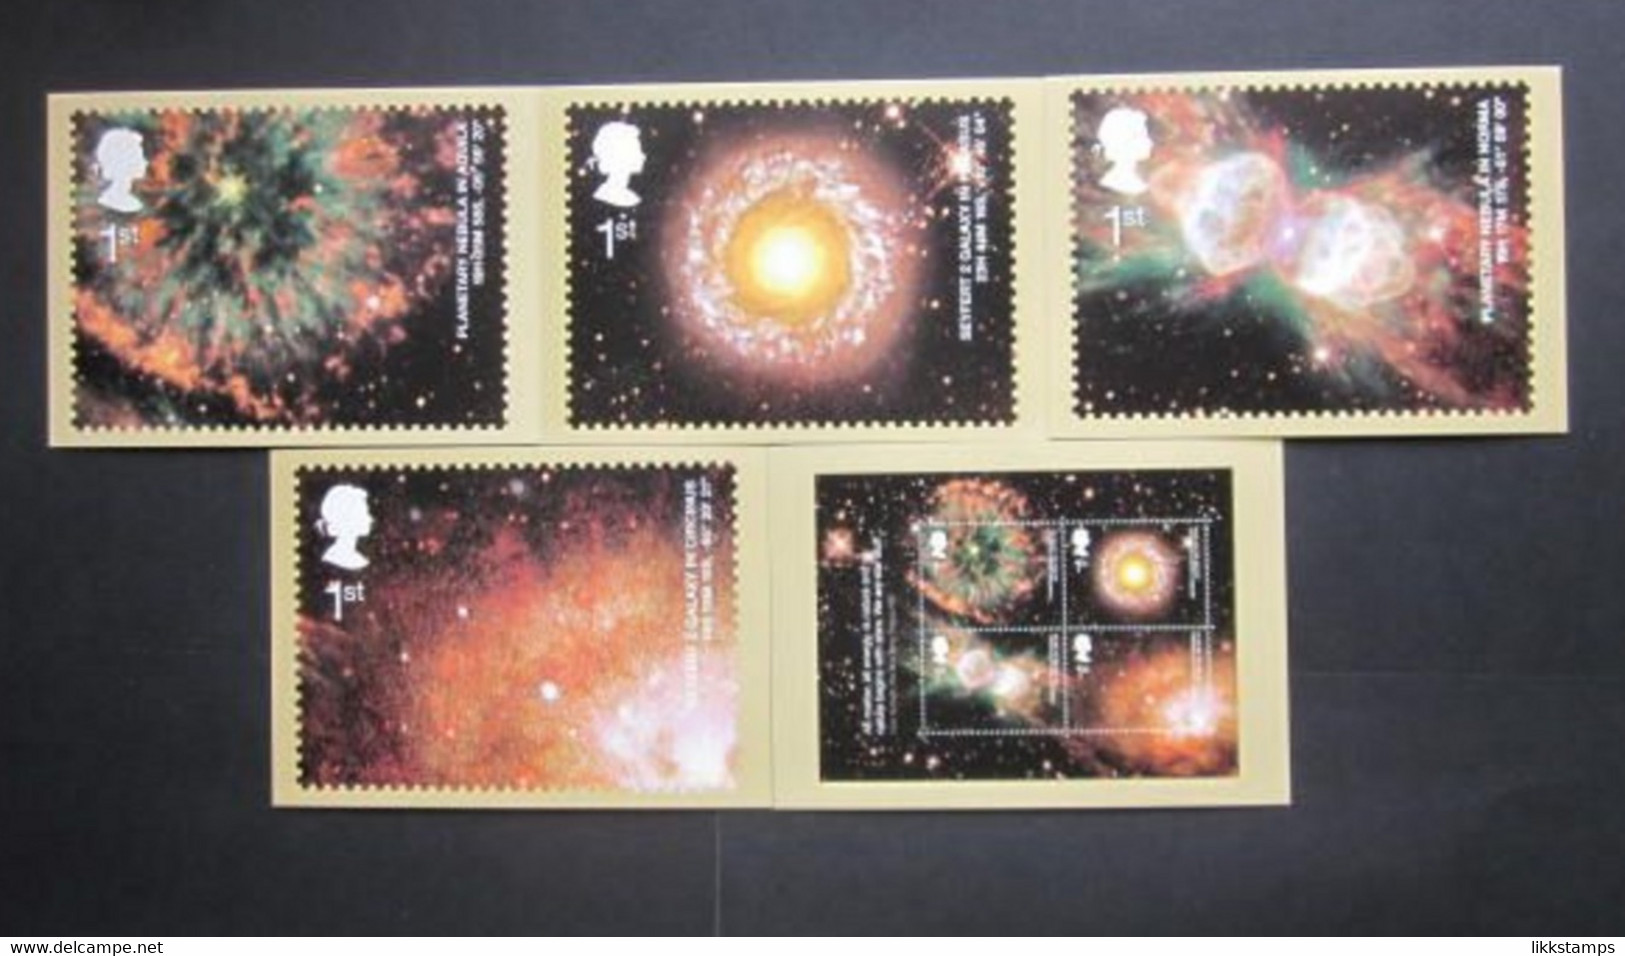 2002 ASTRONOMY MINIATURE SHEET P.H.Q. CARDS UNUSED, ISSUE No. 246 (B) #00891 - Carte PHQ